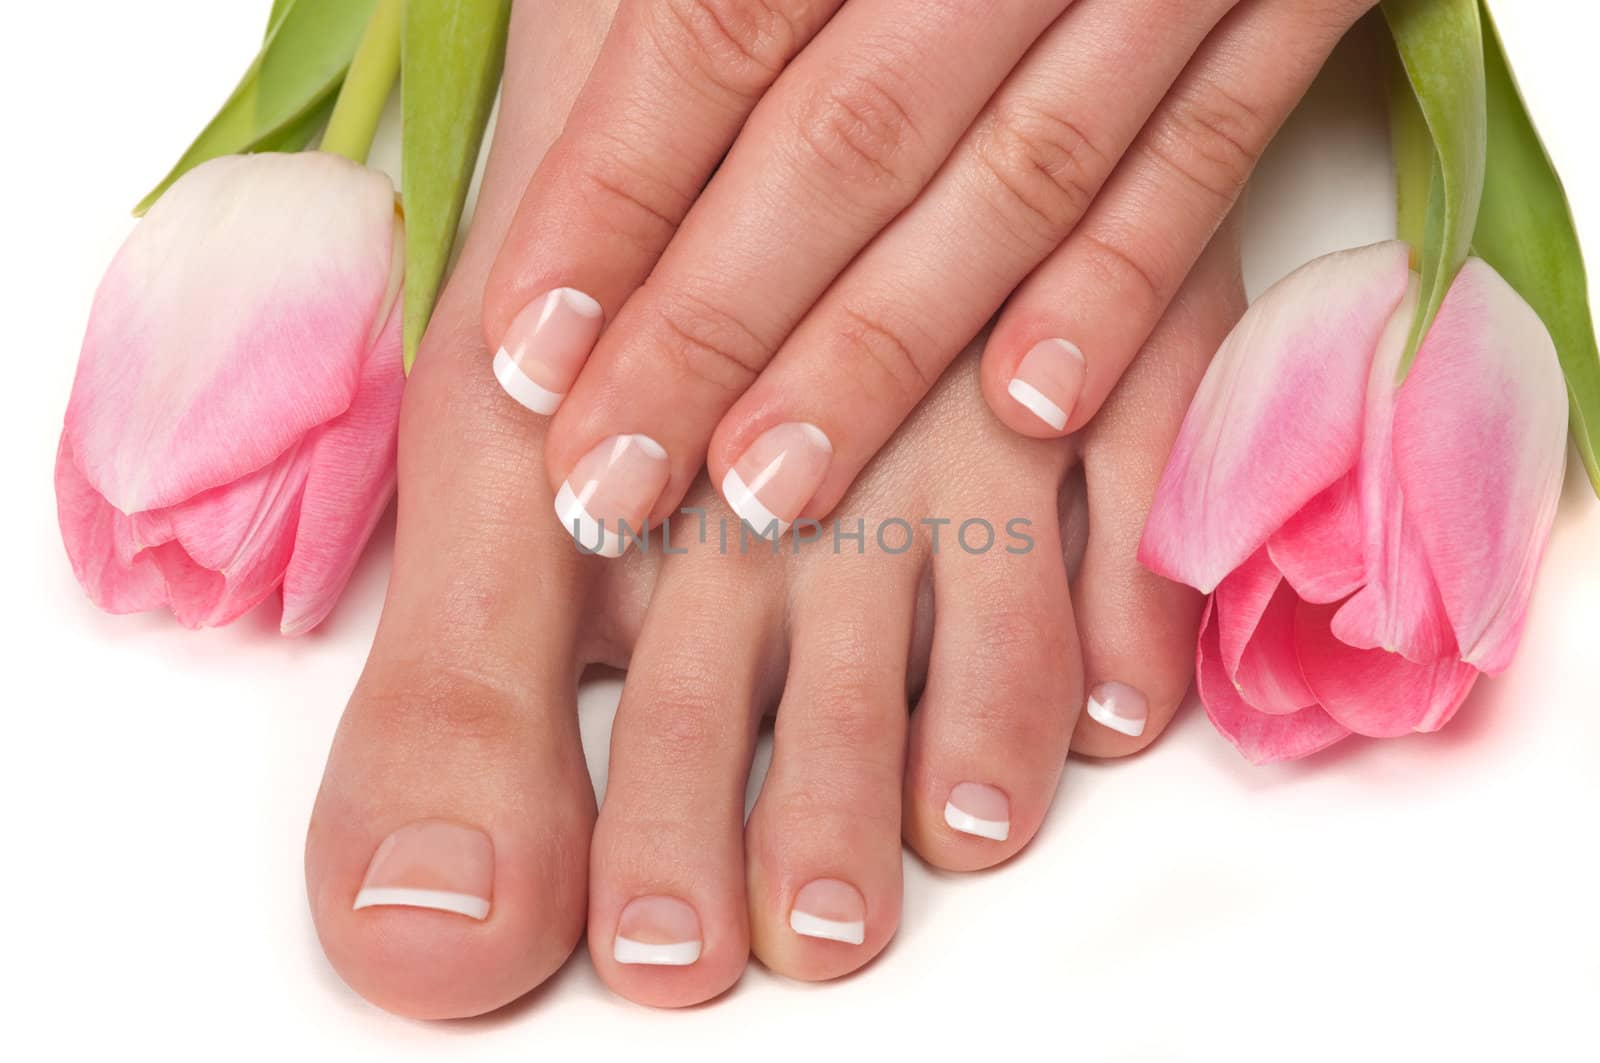 Pedicured feet and manicured hands with Easter tulips